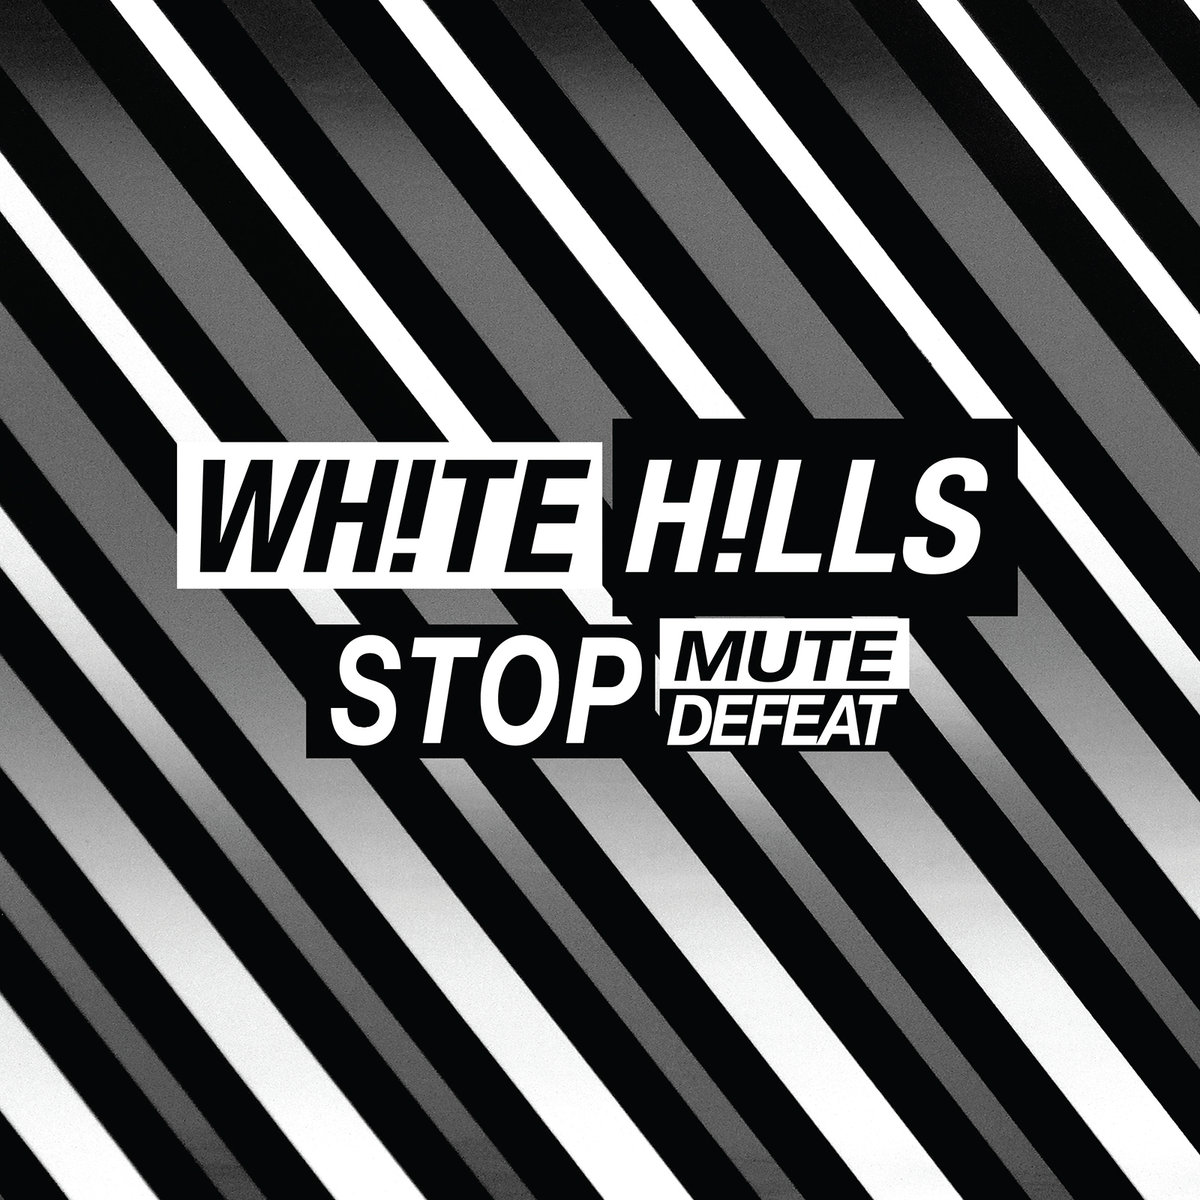 White Hills Stop Mute Defeat